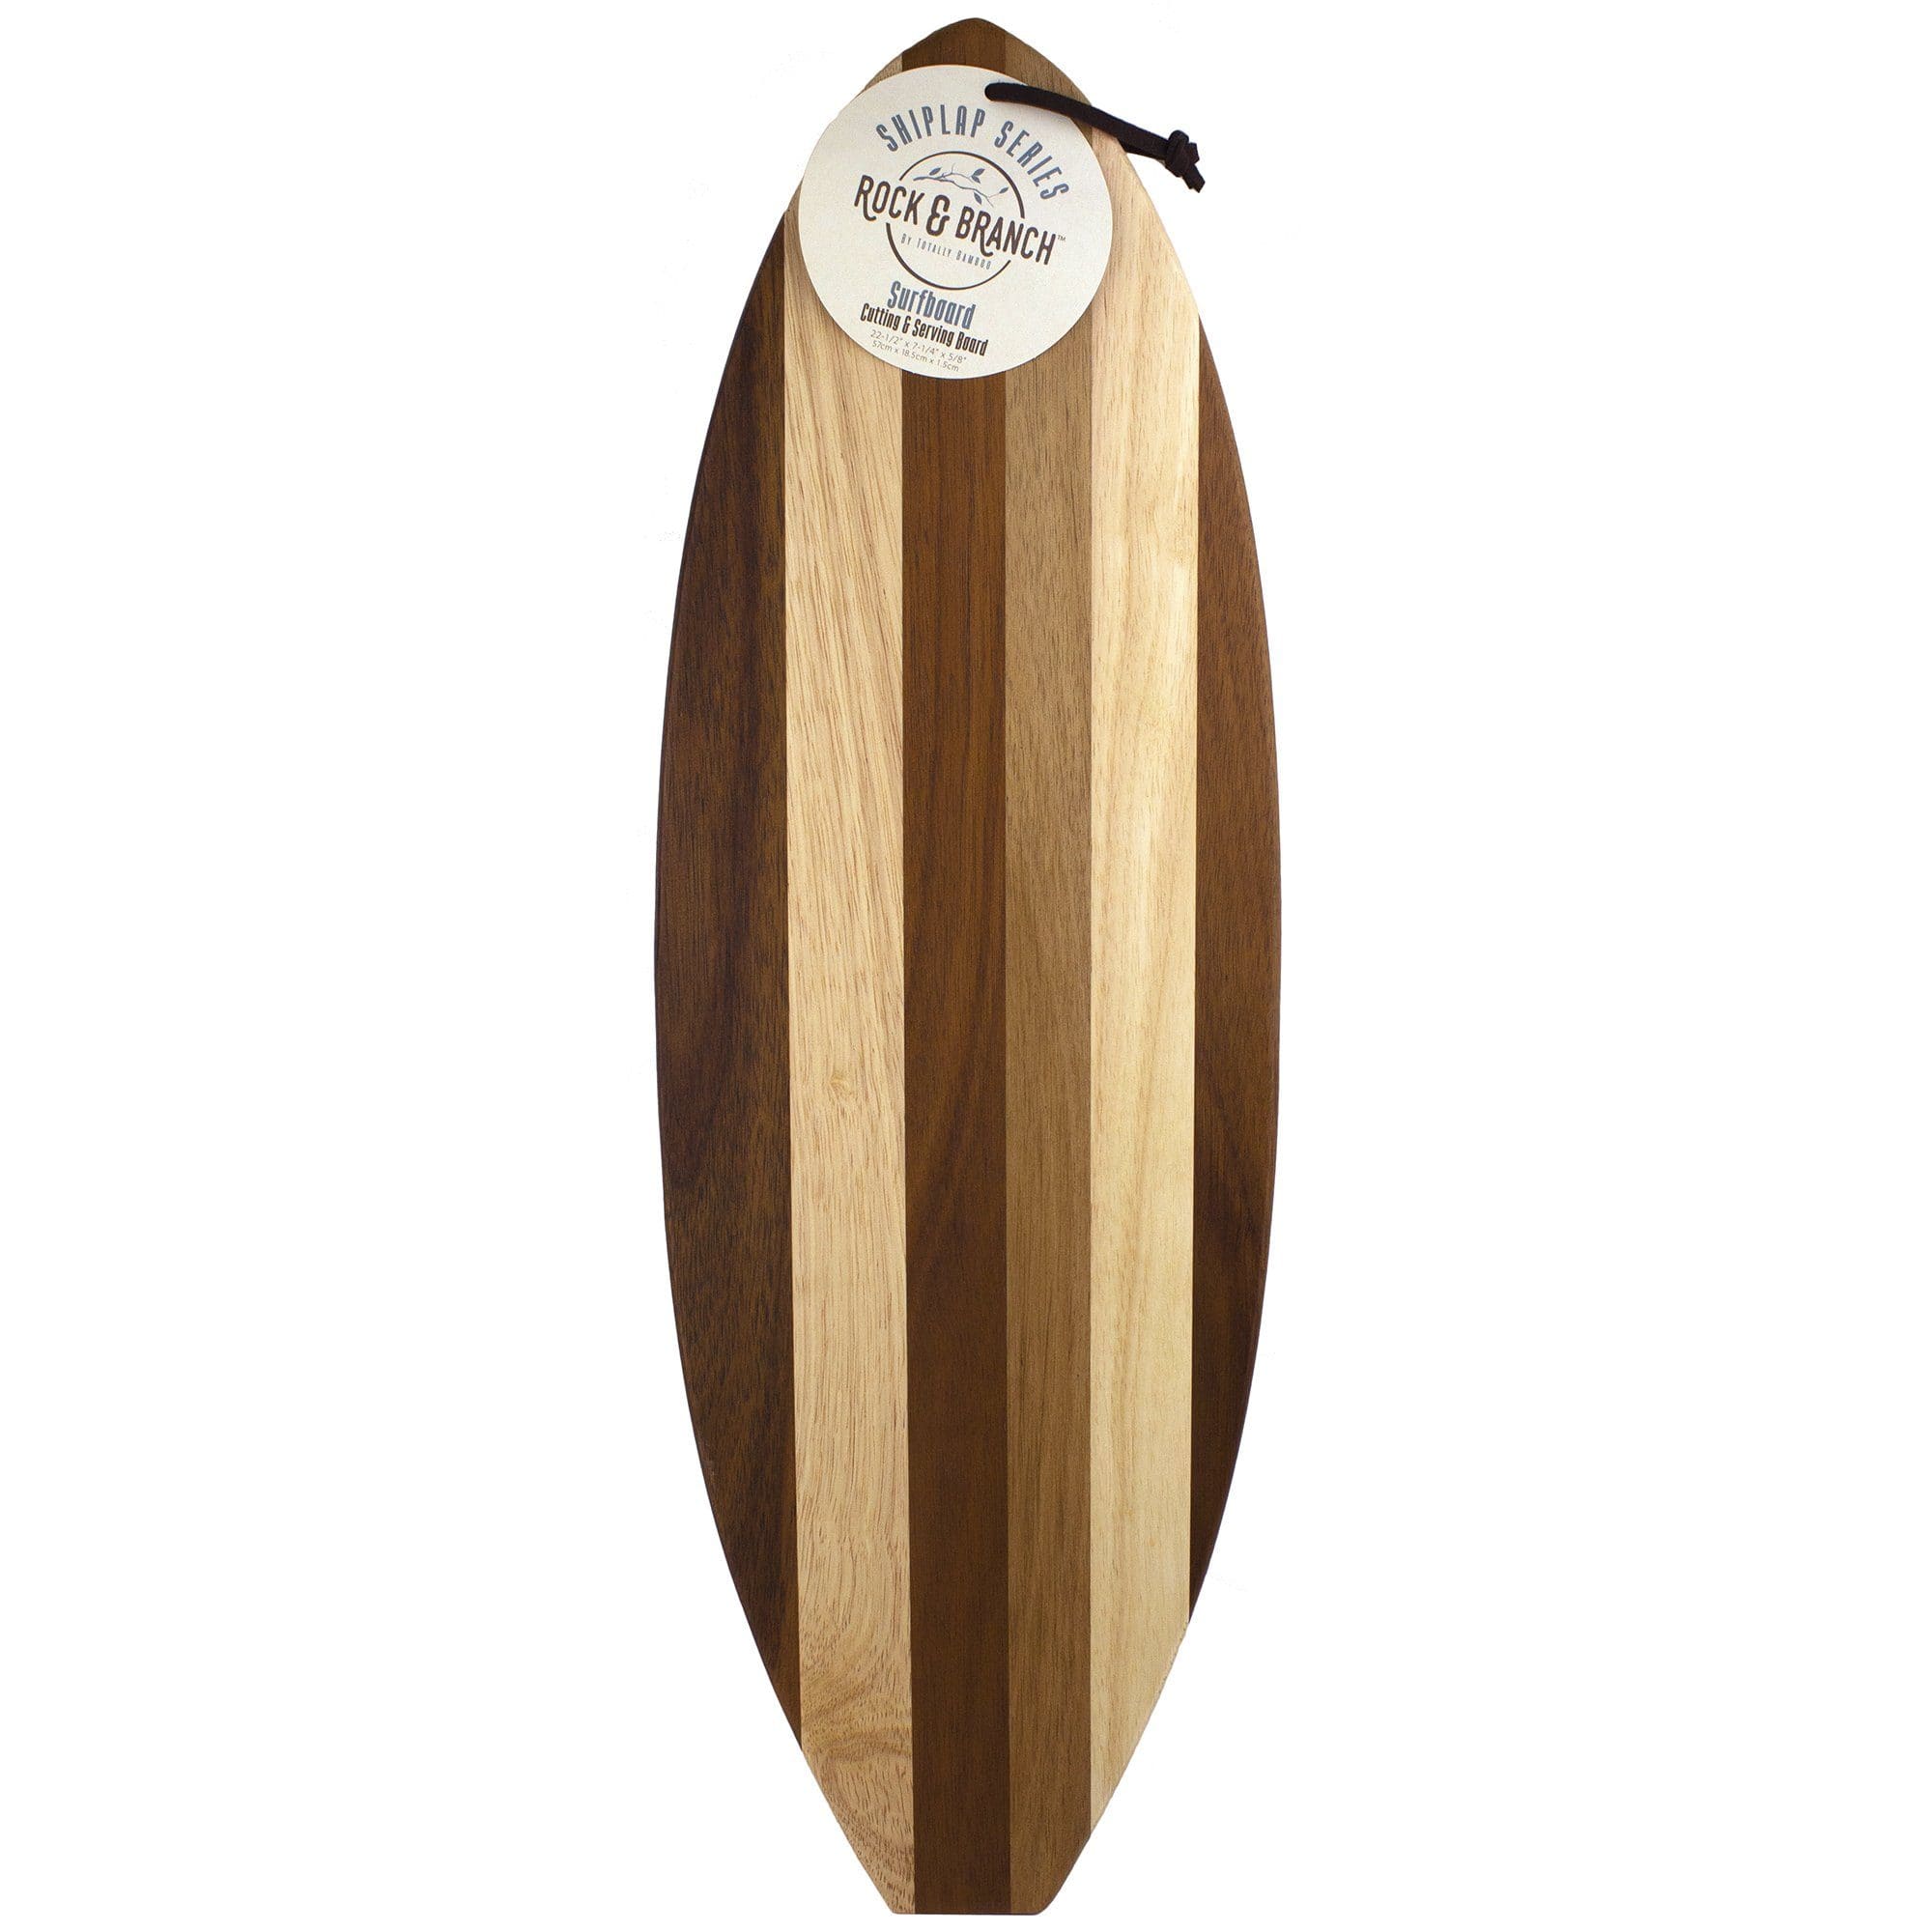 https://totallybamboo.com/cdn/shop/products/rock-branchr-shiplap-series-surfboard-shaped-wood-serving-and-cutting-board-totally-bamboo-747237.jpg?v=1628151565